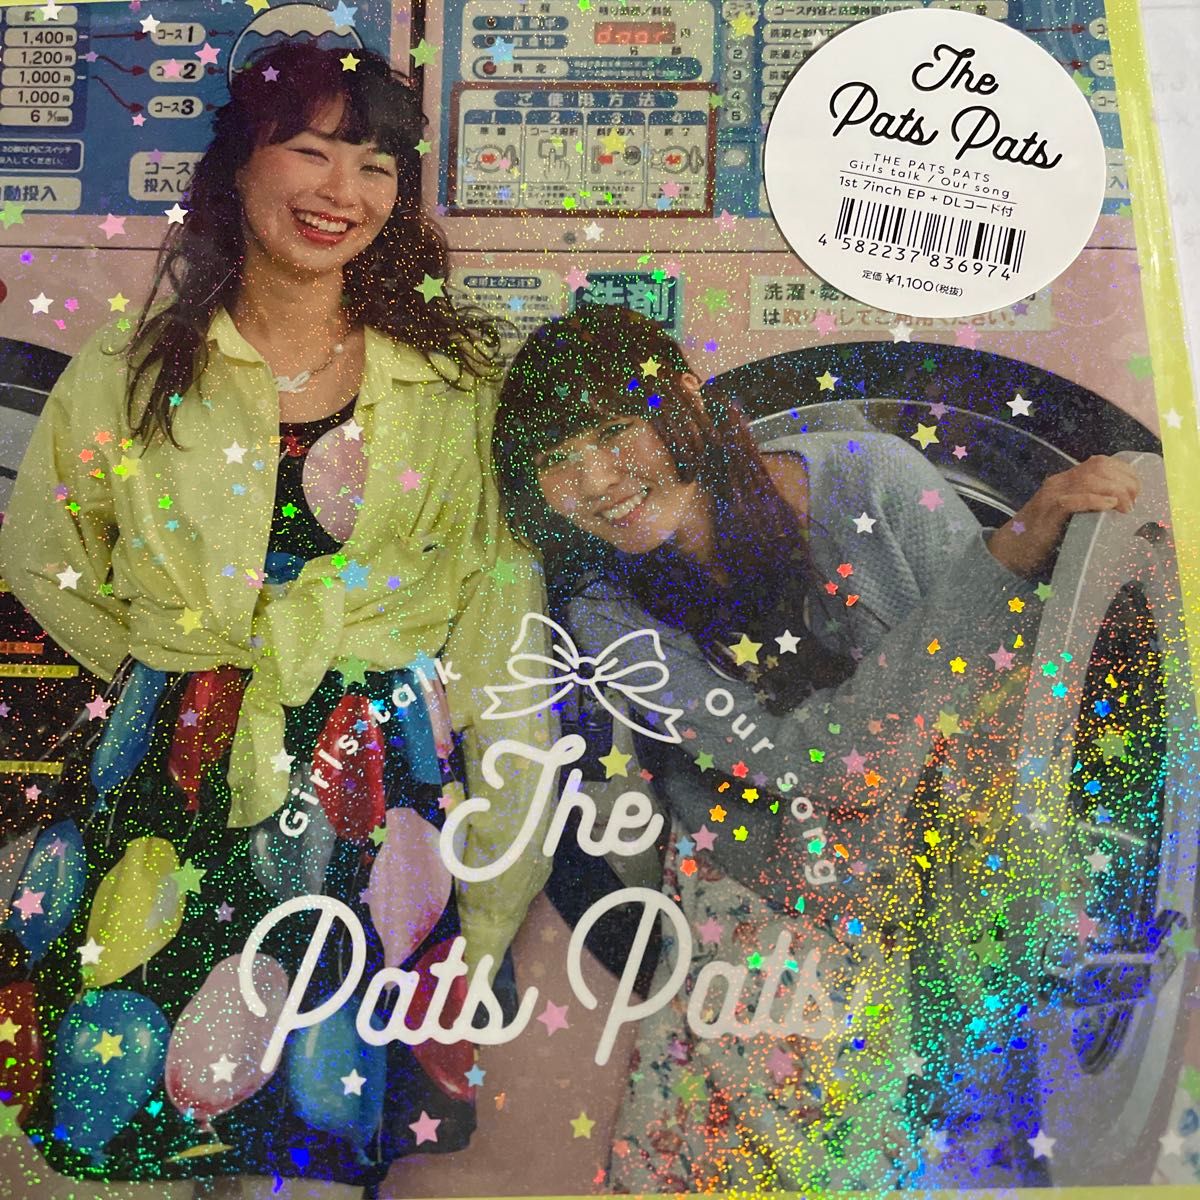 Girls talk / Our songTHE PATS PATS 